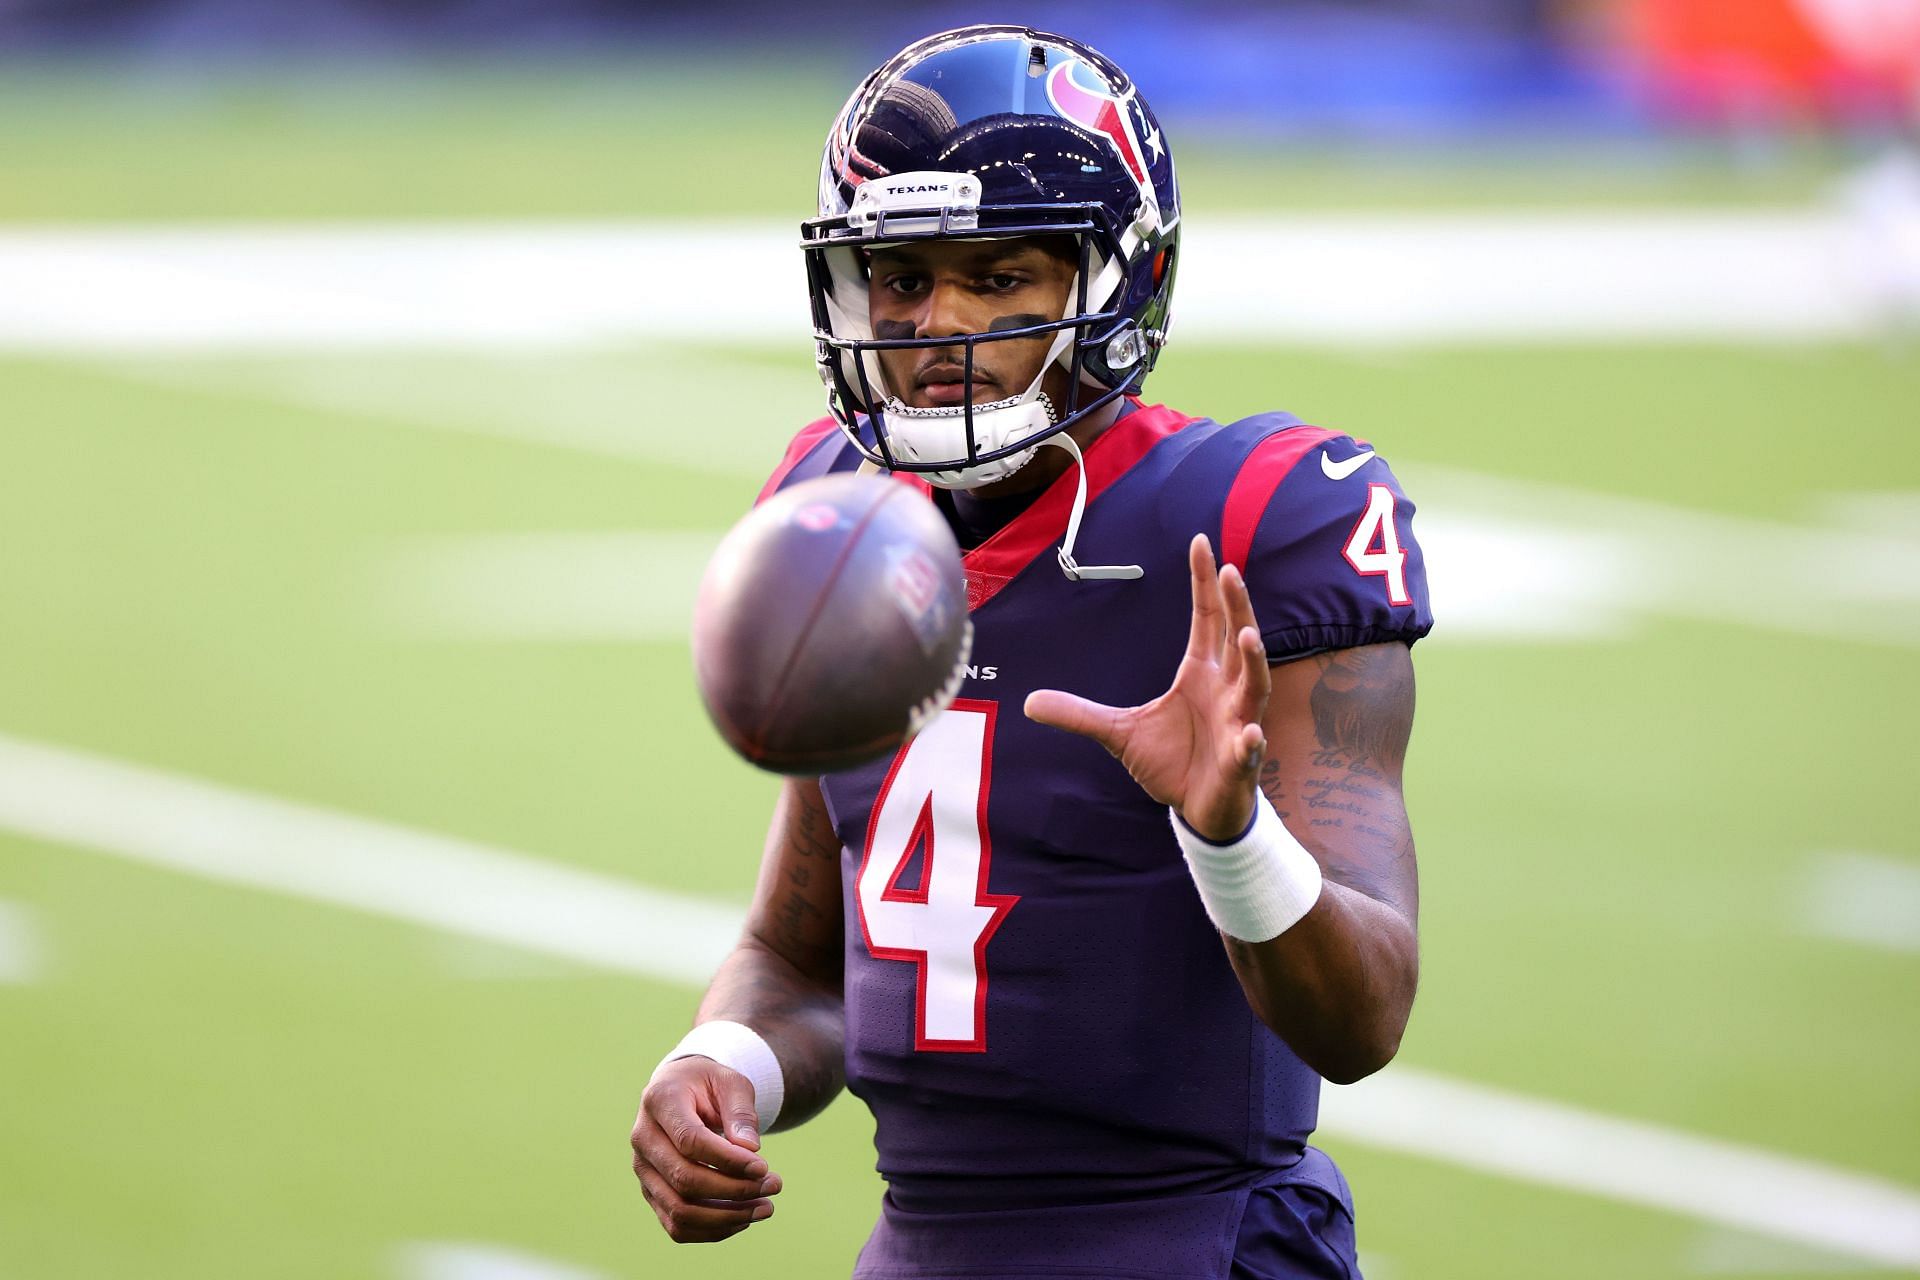 Mike Florio thinks Deshaun Watson needs to surrender the earnings he made for the 2021 season.